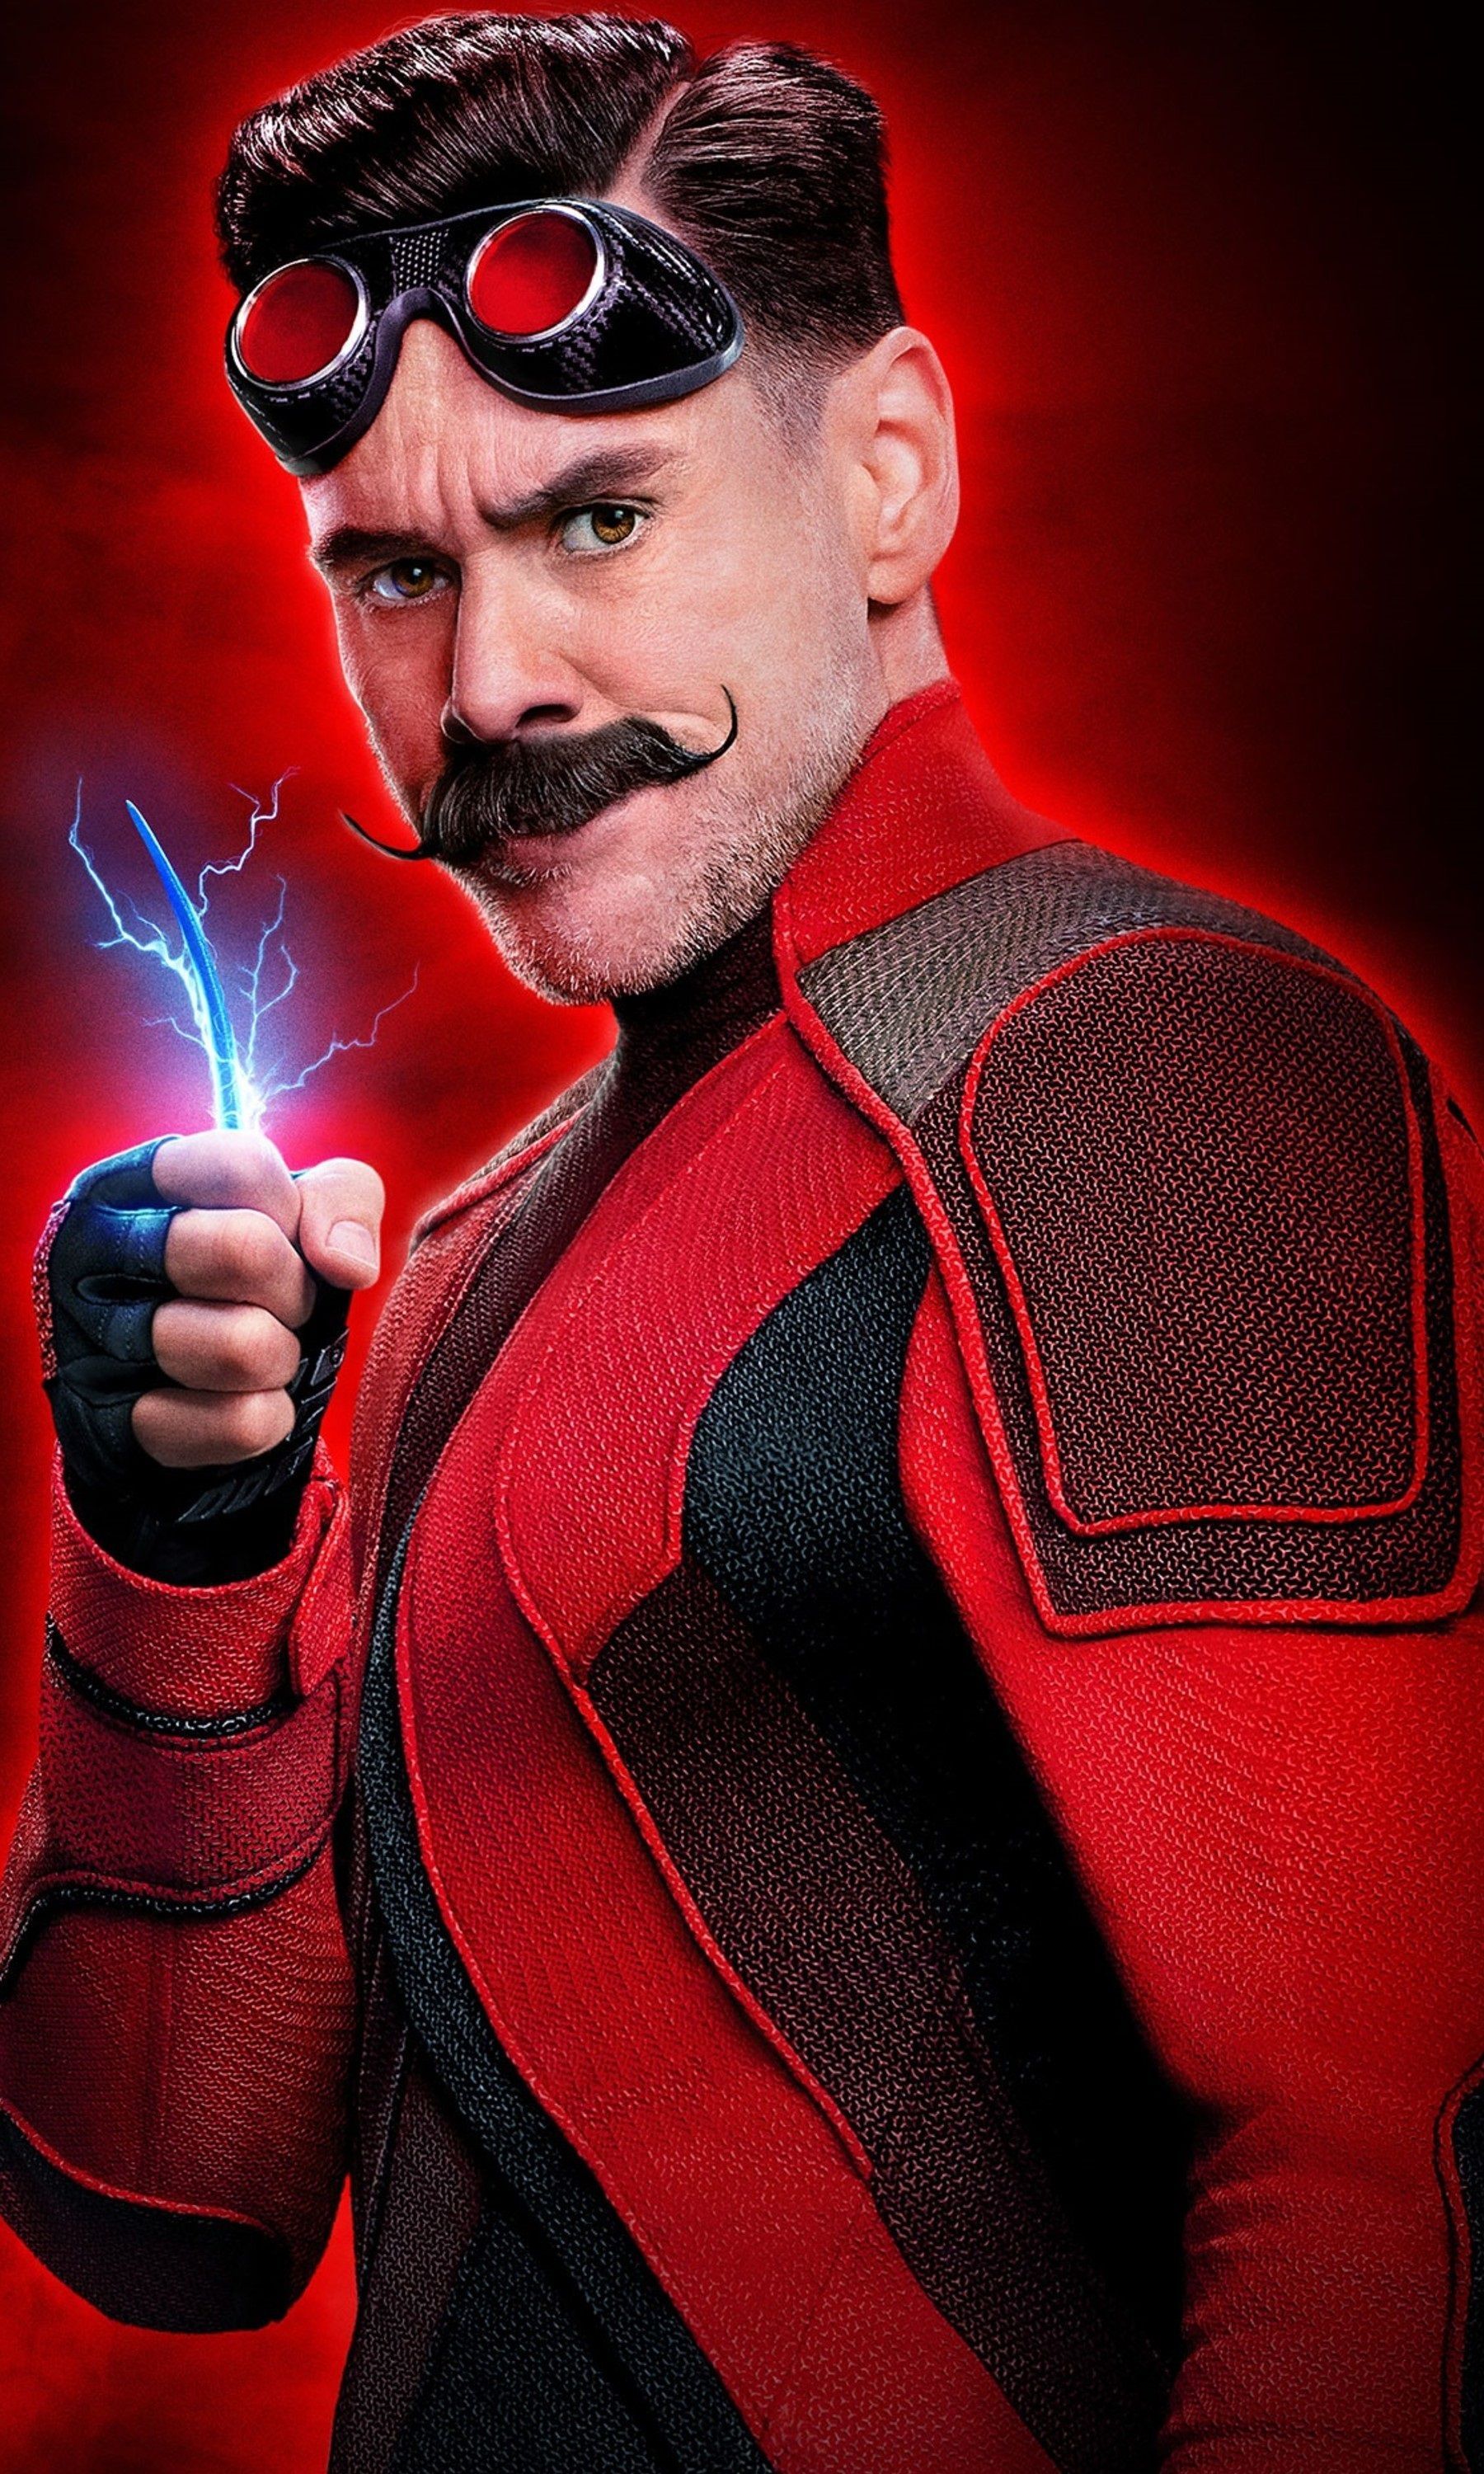 Dr. Robotnik, Also Referred To As Eggman, Is The Main Antagonist Of The 2020 Live Action Film Sonic The Hedgehog, Which Is. Hedgehog Movie, Doctor Eggman, Sonic